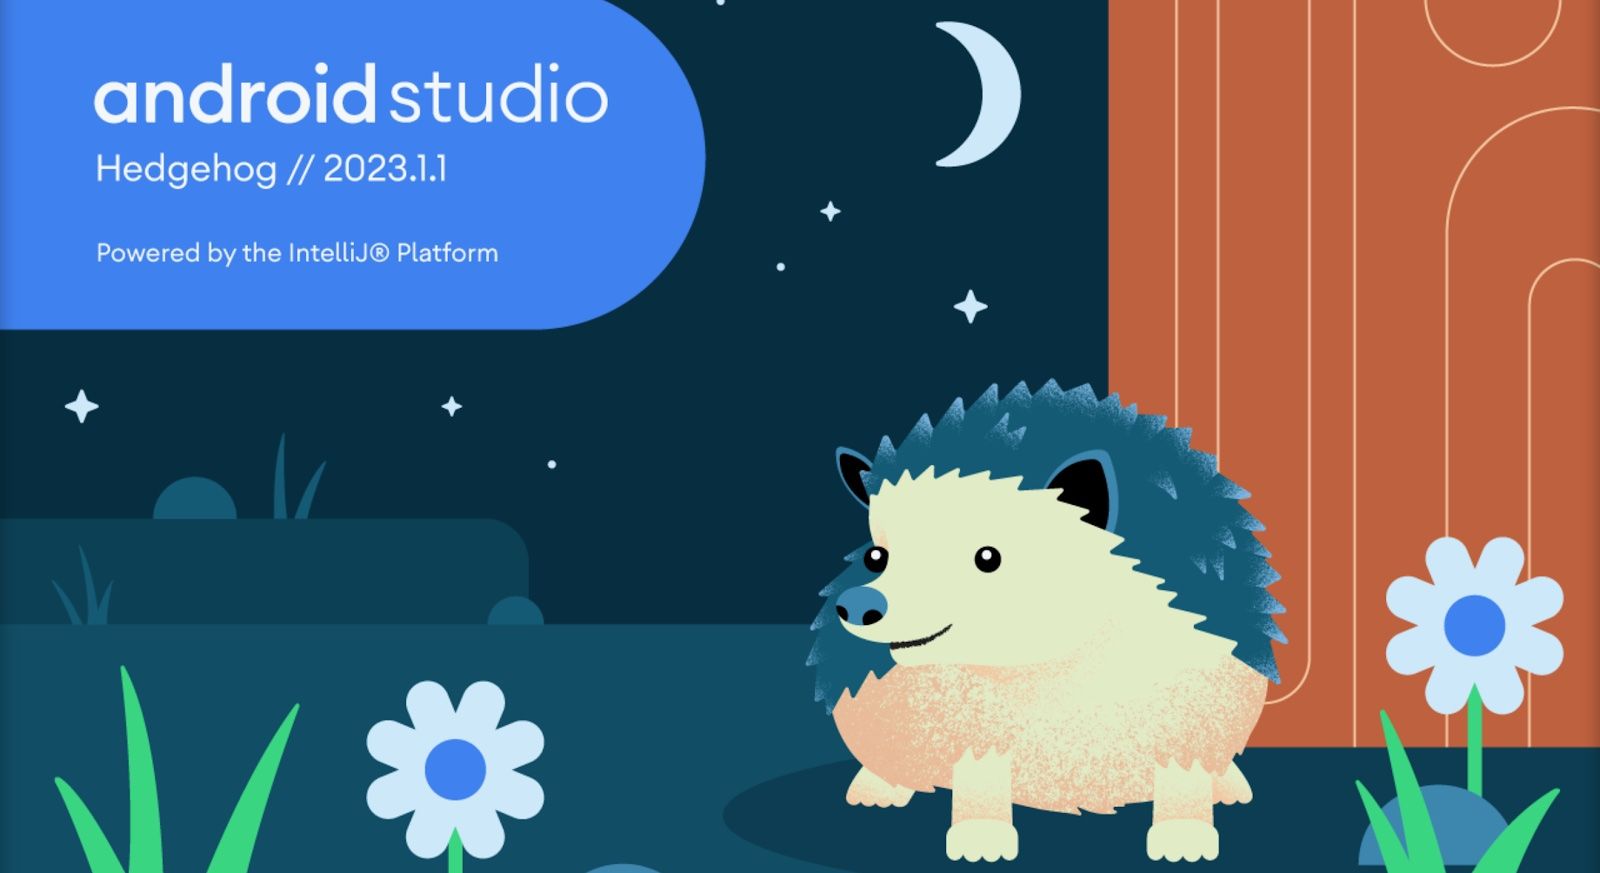 An artistic illustration for Android Studio 2023.1.1 Hedgehog's release, featuring a drawn hedgehog on meadow at night